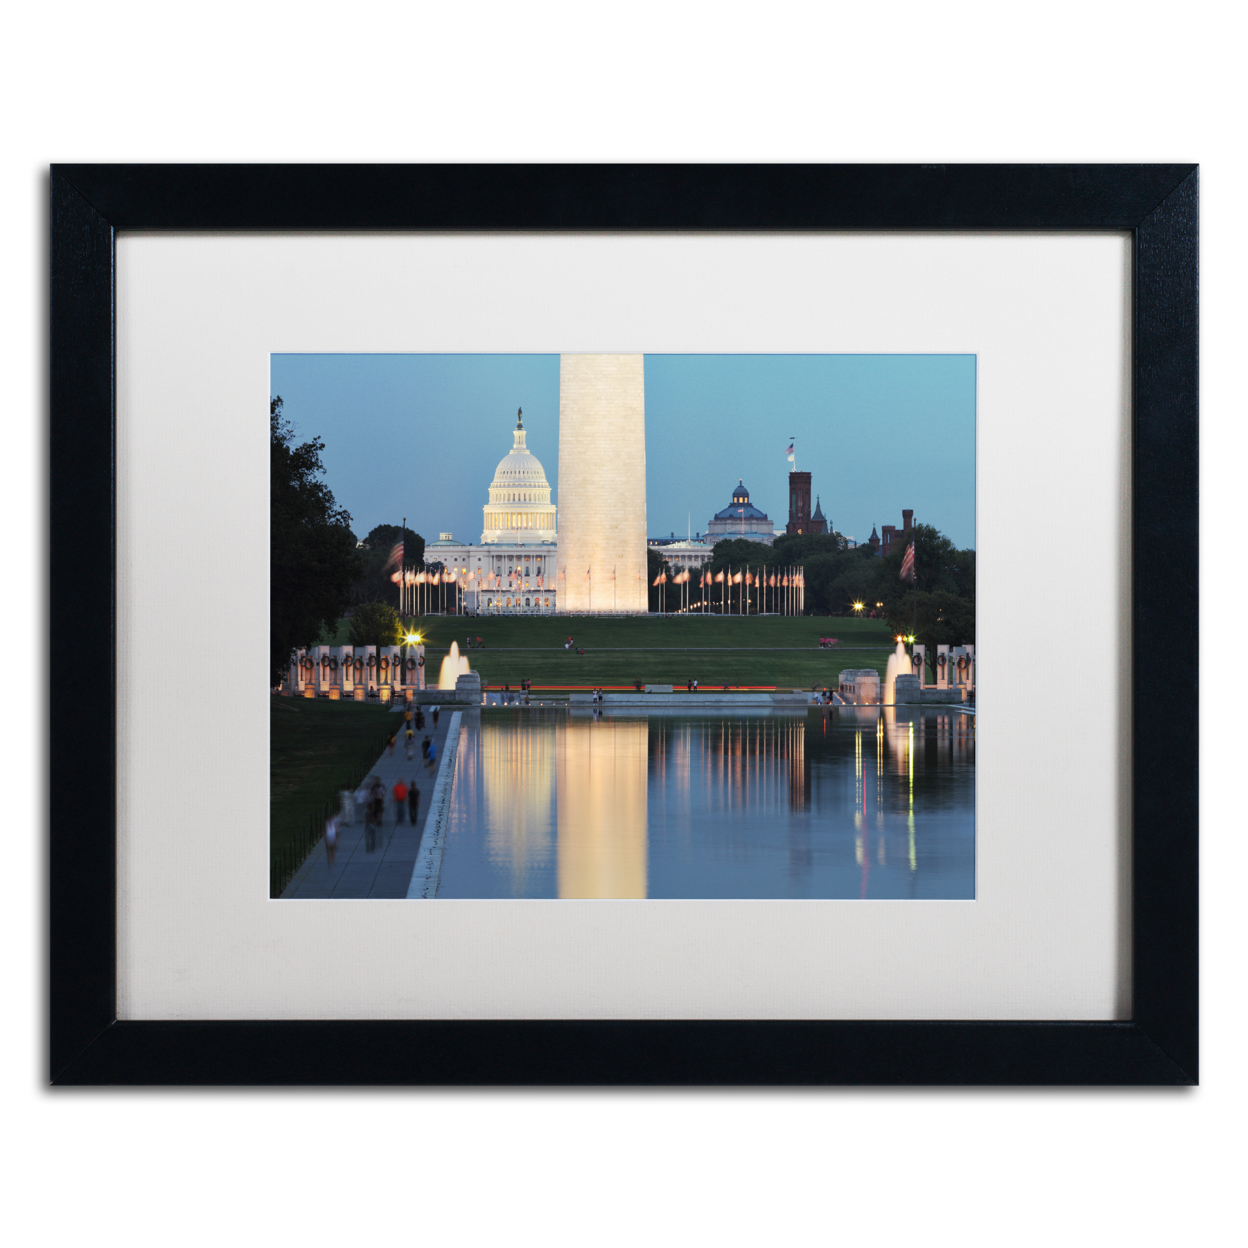 Gregory O'Hanlon 'National Mall At Twilight' Black Wooden Framed Art 18 X 22 Inches